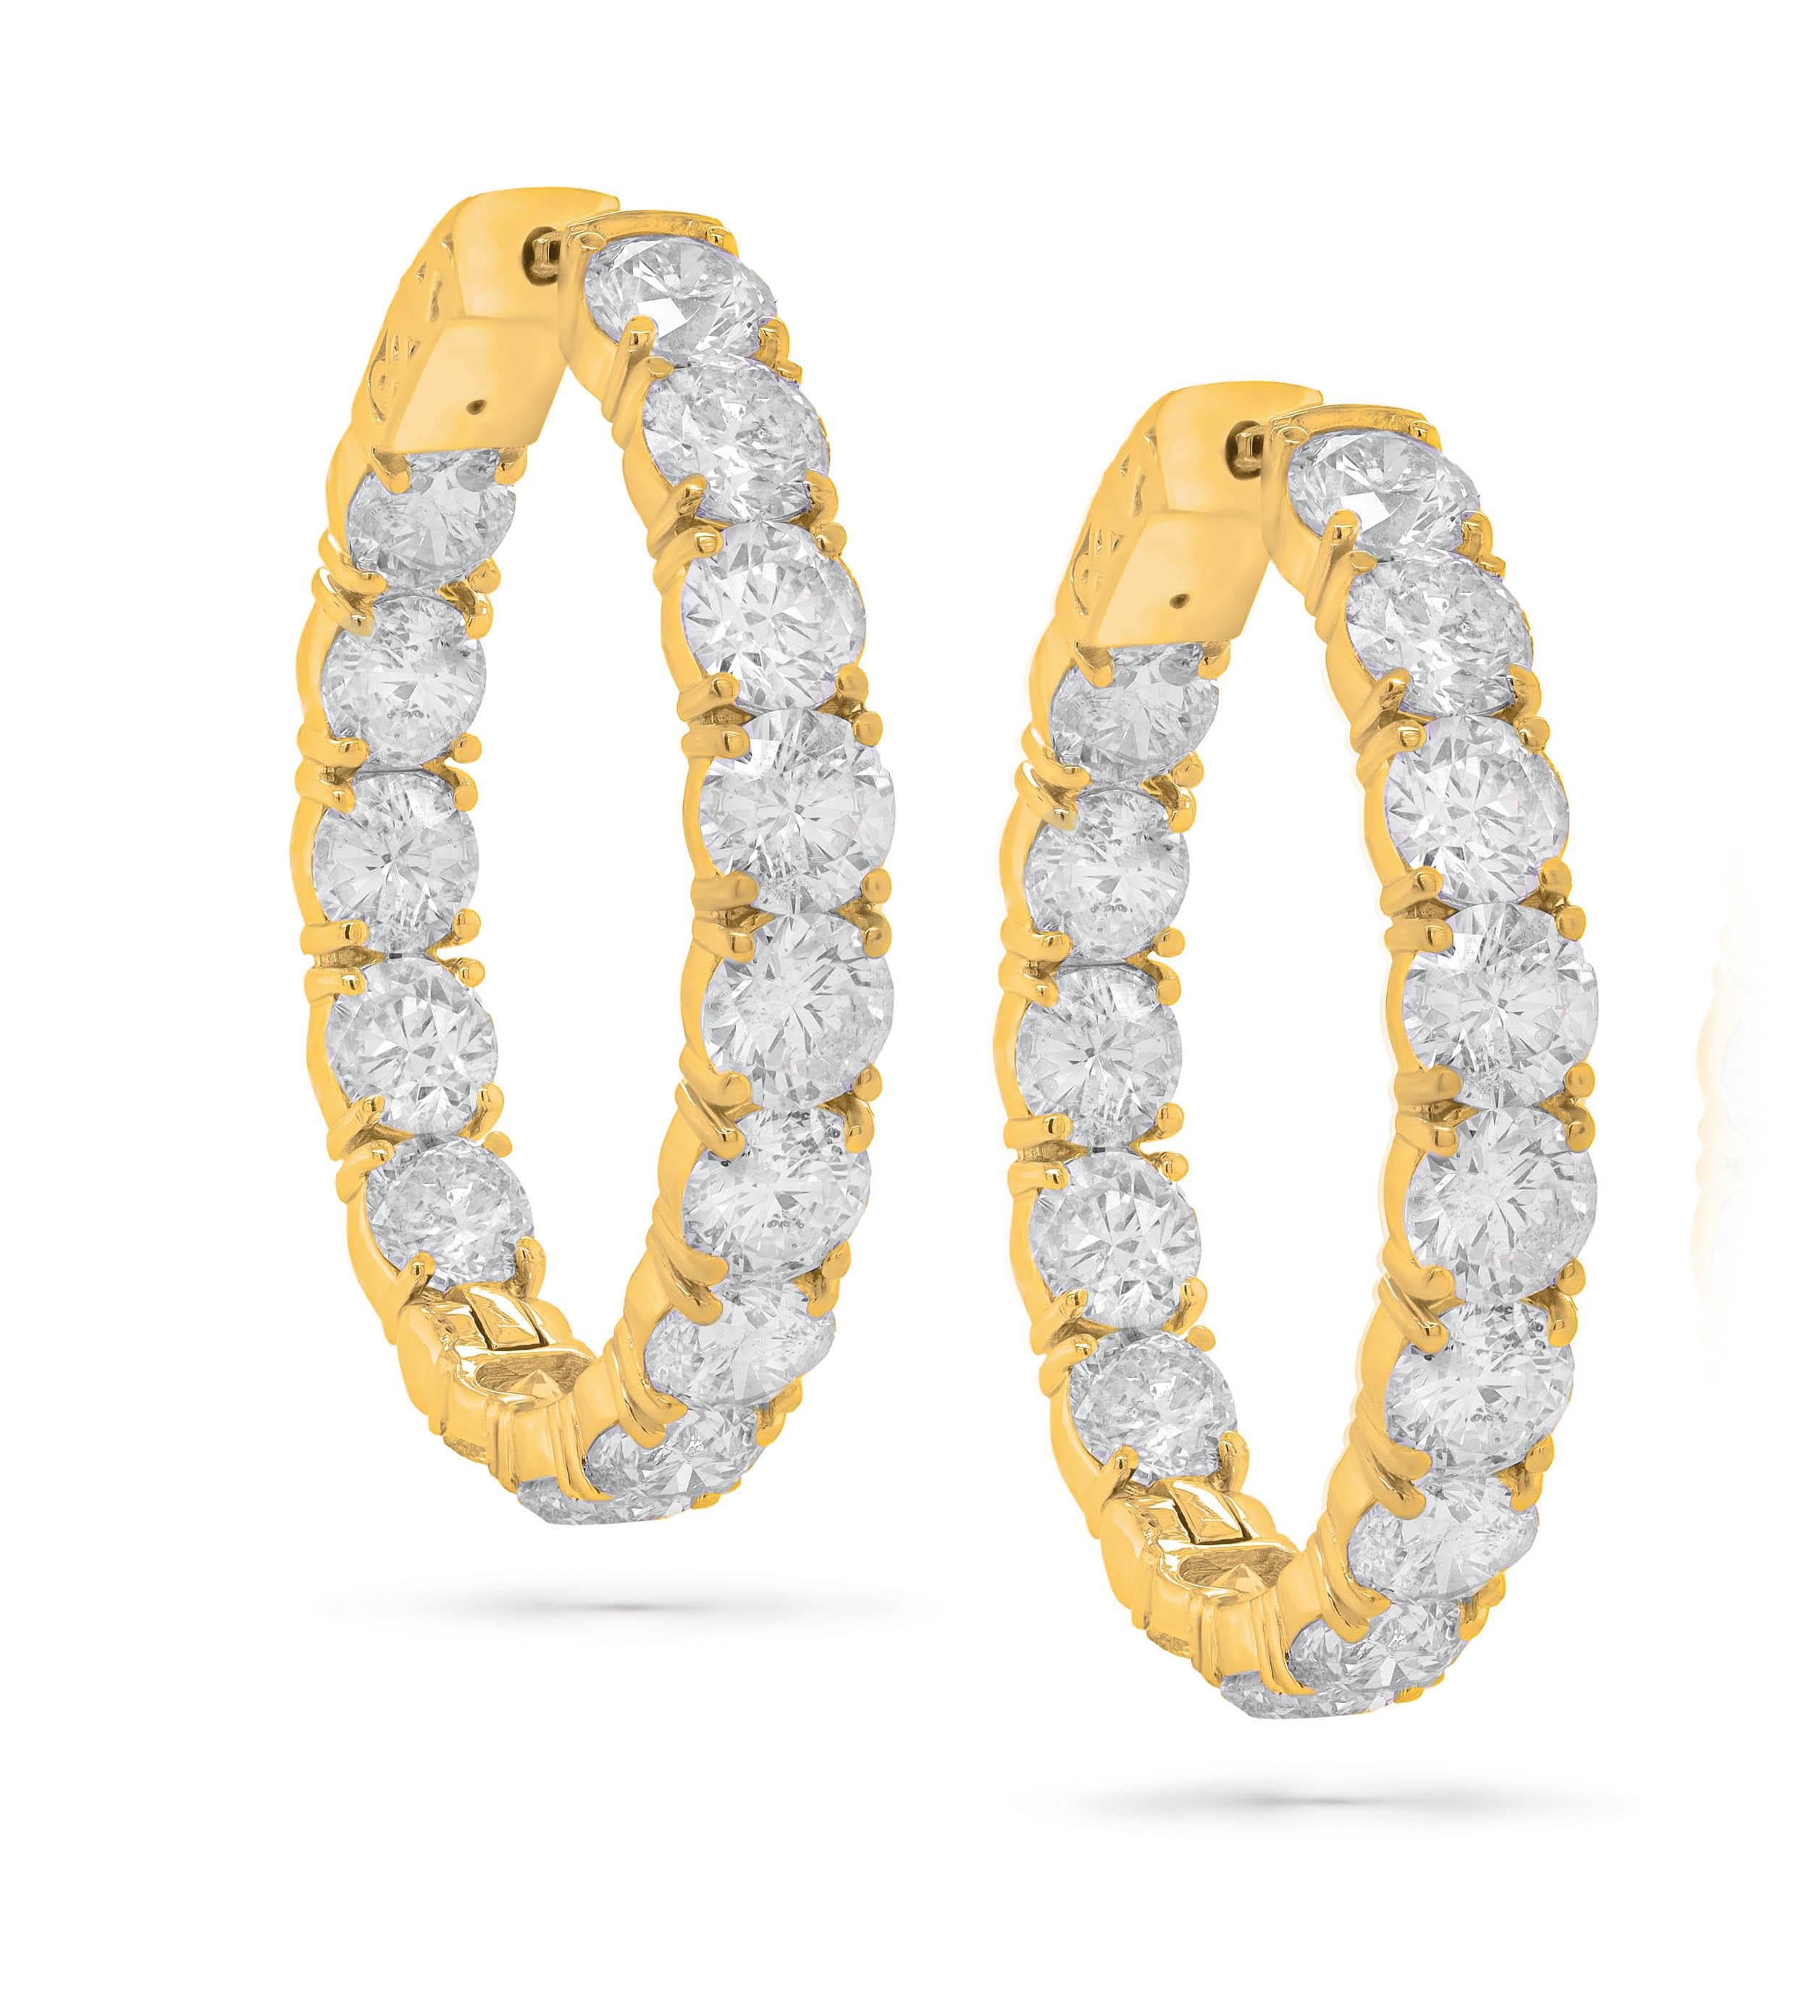 18K Yellow Gold Diamond Earrings featuring 7.50 Carat T.W. of Natural Diamonds

Underline your look with this sharp 18K White Gold Diamond Earrings. High quality Diamonds. This Earrings will underline your exquisite look for any occasion.

. is a